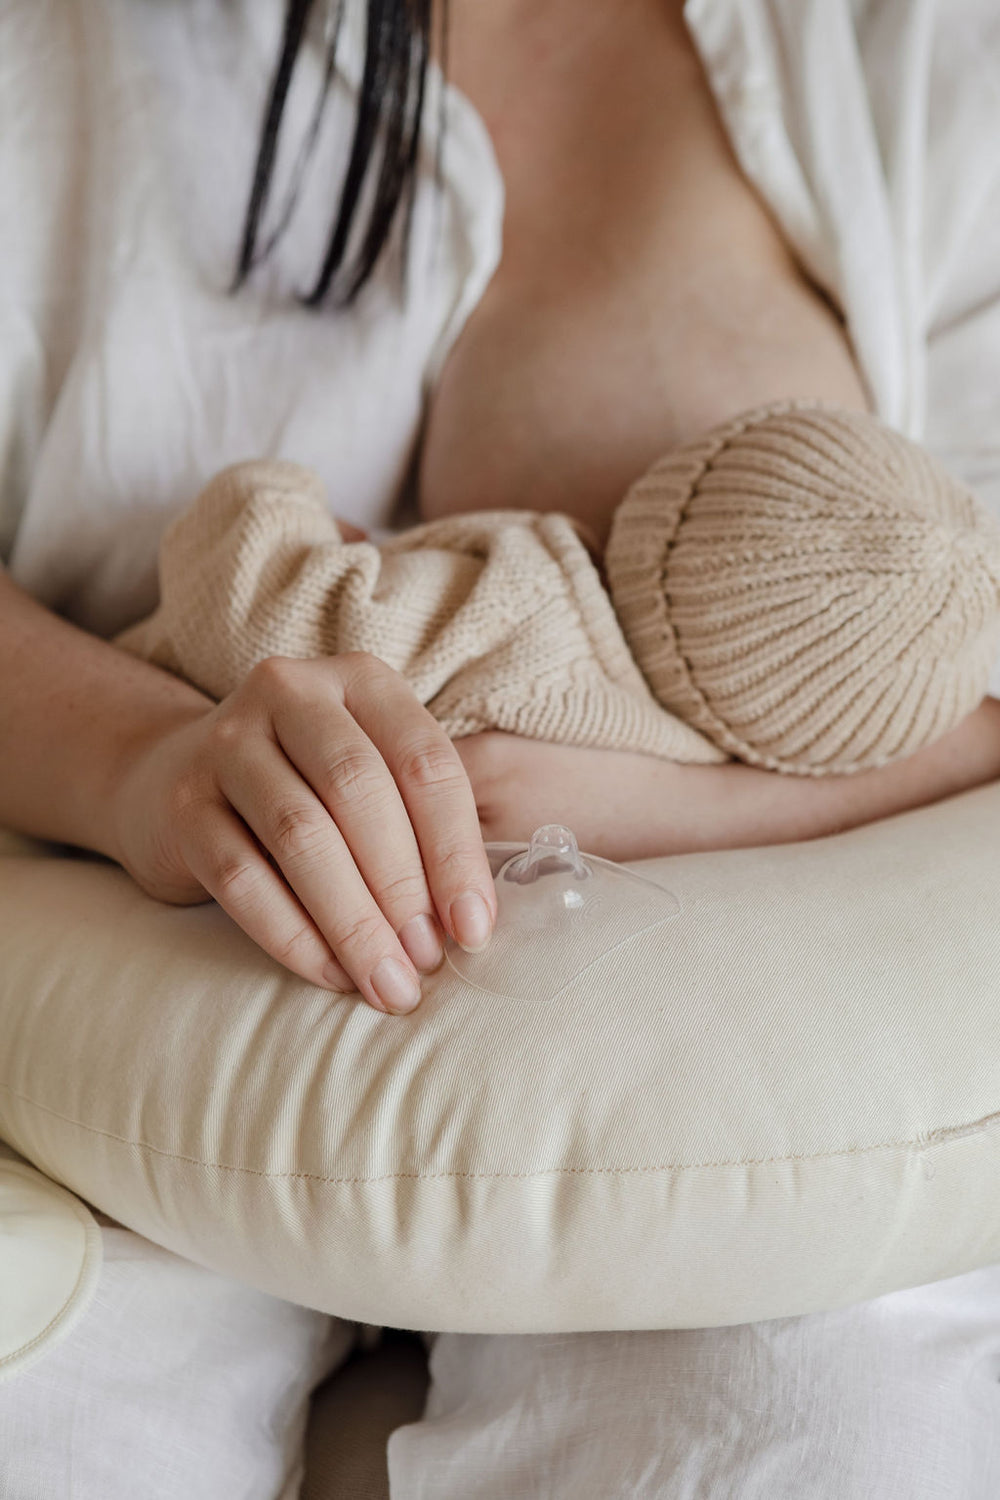 A woman is breastfeeding her baby on a pillow.